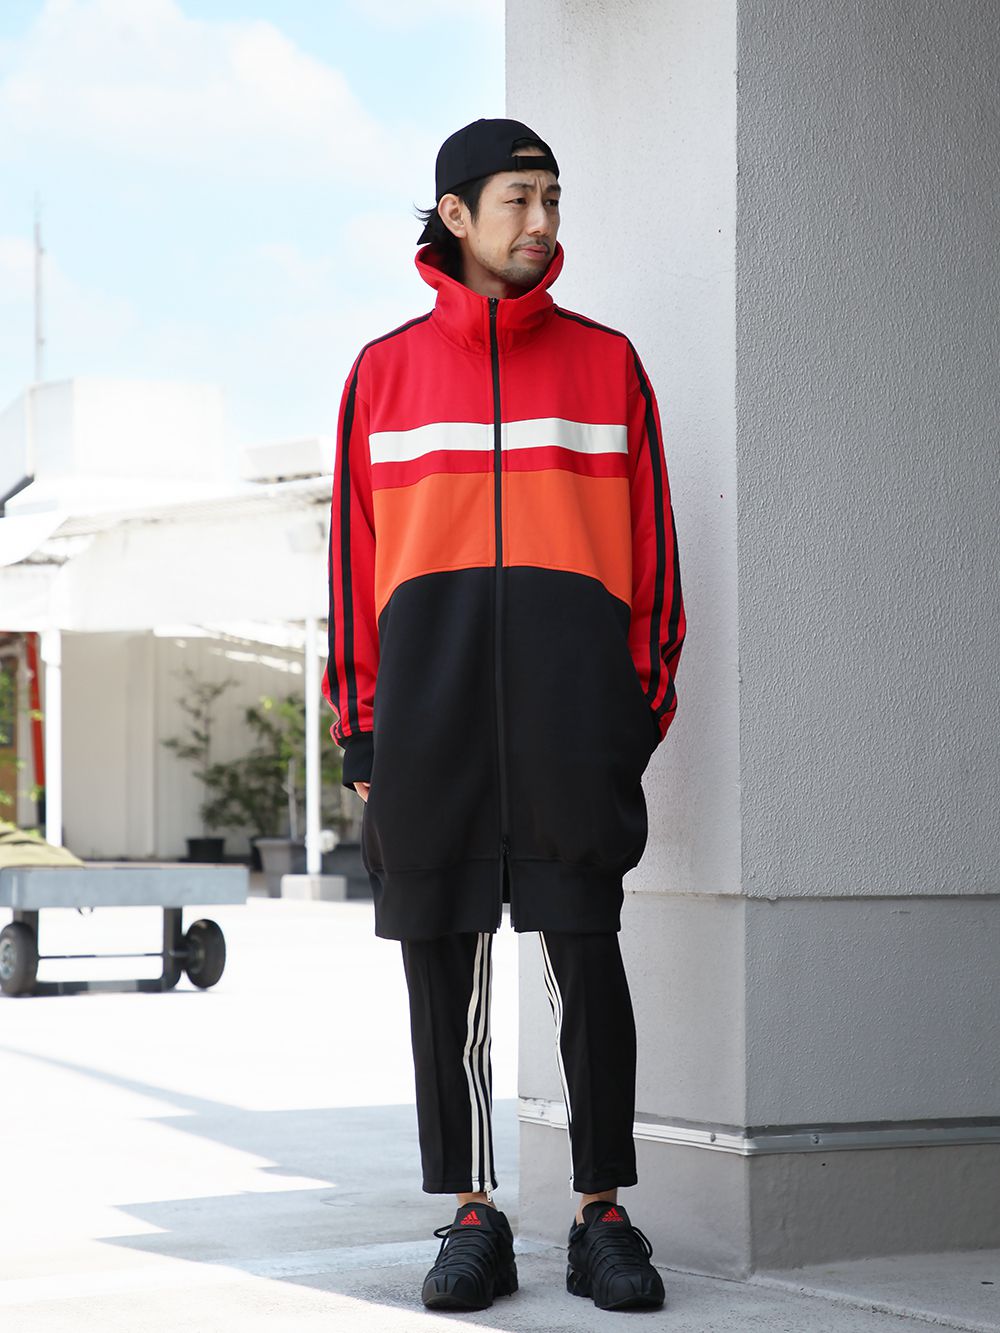 Y-3 [ Oversized Varsity Track top ] Styling!! - FASCINATE BLOG